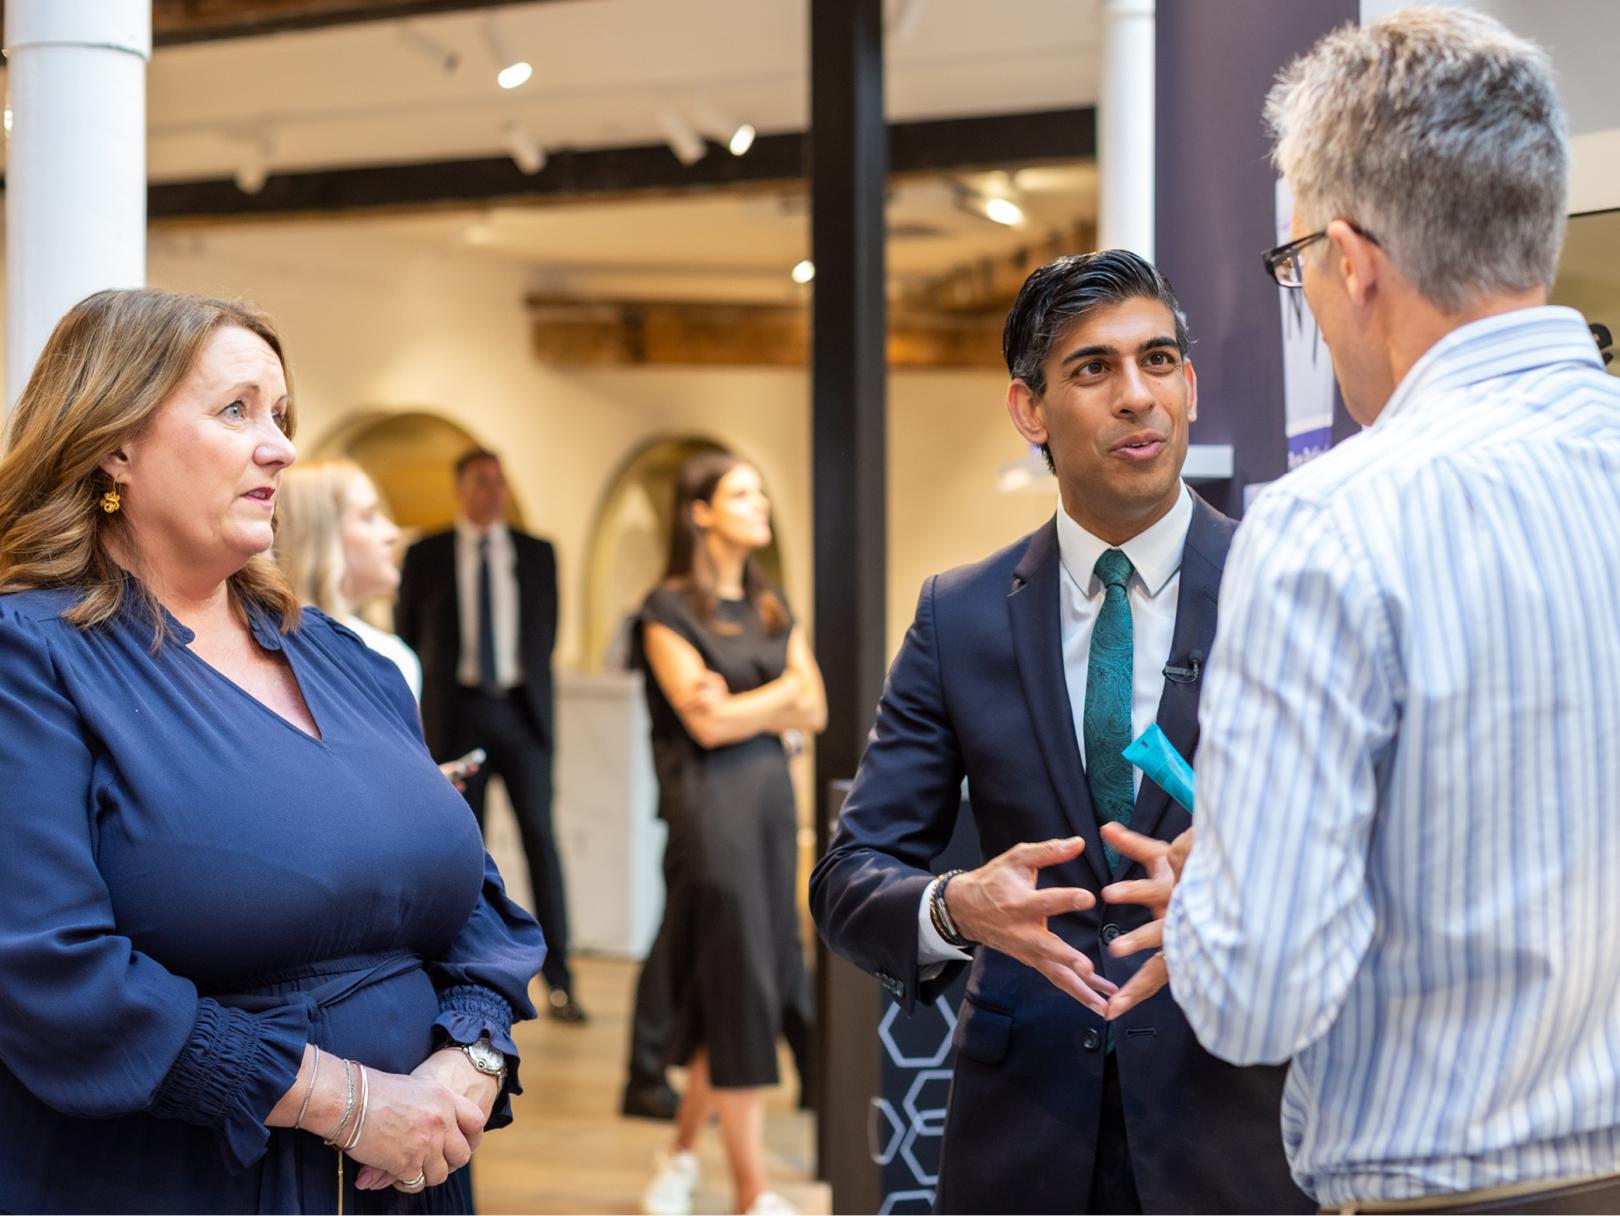 Rishi Sunak (UK Chancellor) and Annie Murphy talking to Dr Mike Bell